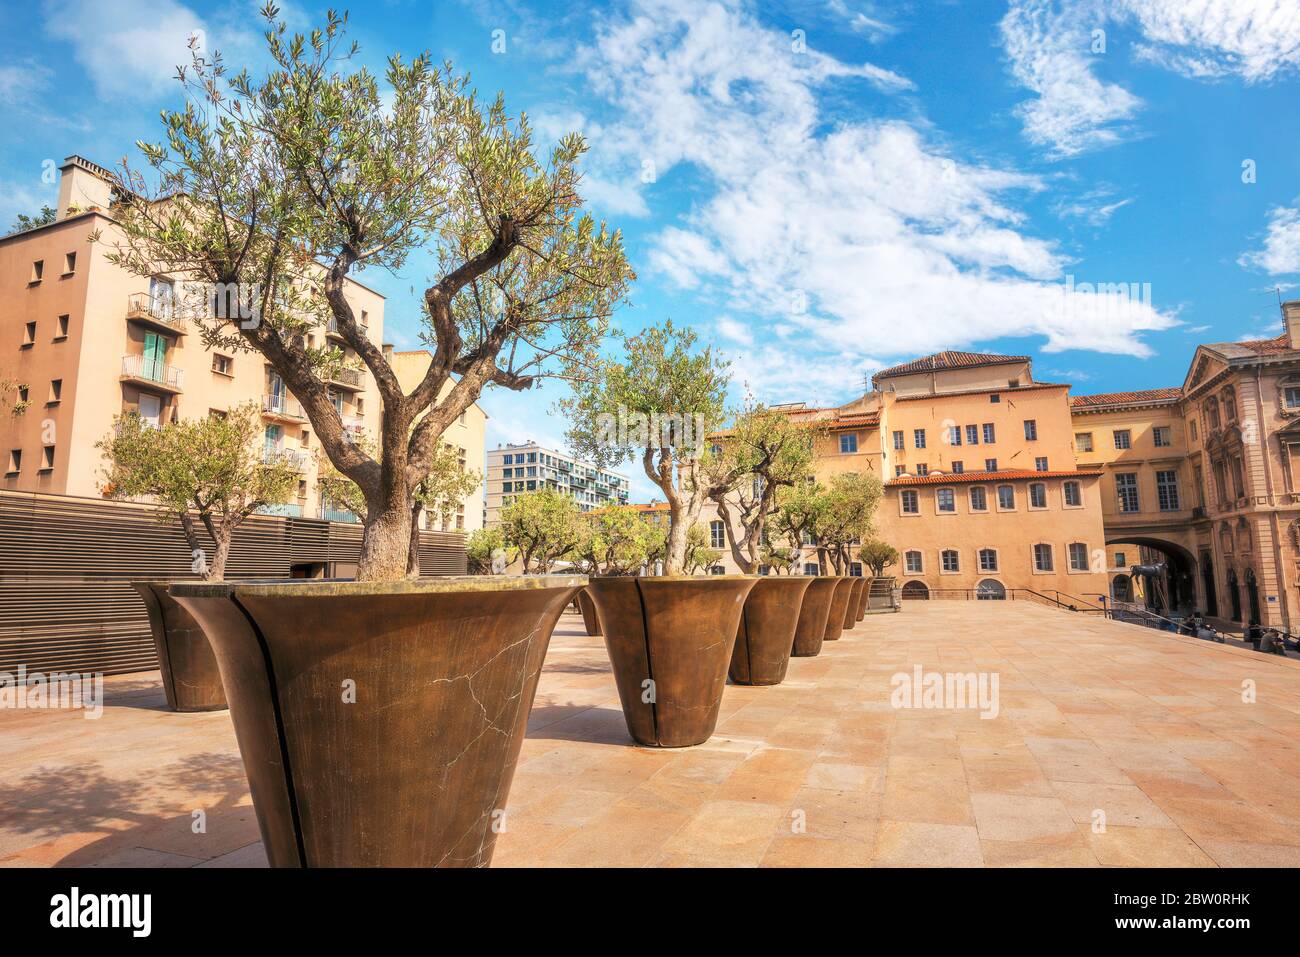 Beautiful terrace with small trees in flower pots. Urban architectural design in historic district of Le Panier.Marseille, France Stock Photo